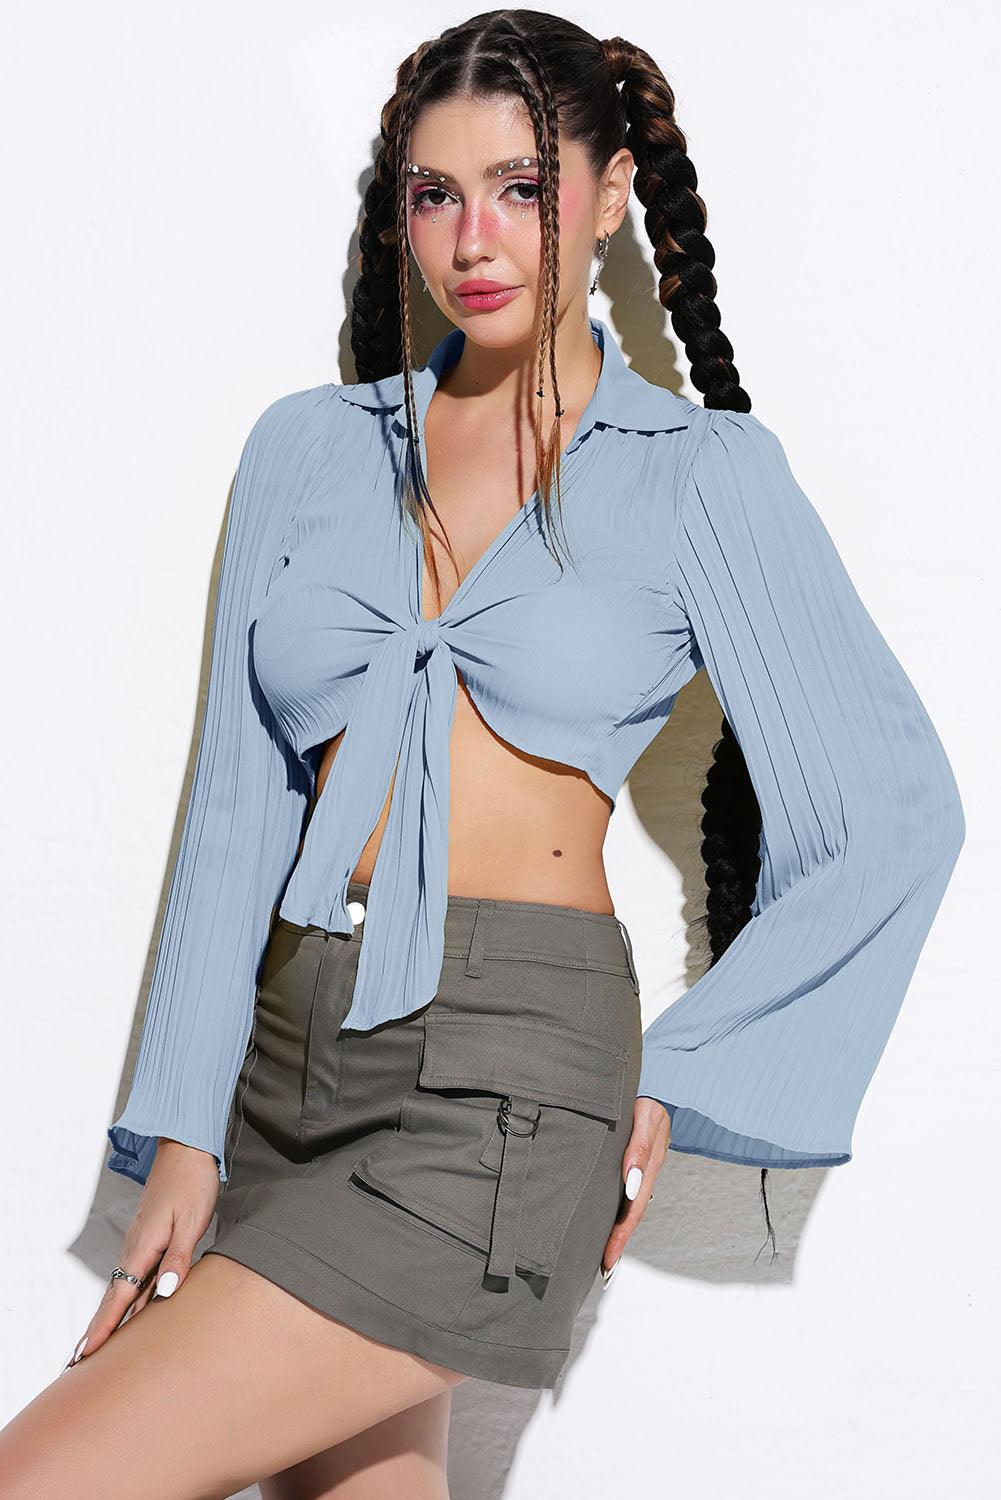 Women's Shirts Tie Front Johnny Collar Flare Sleeve Cropped Top